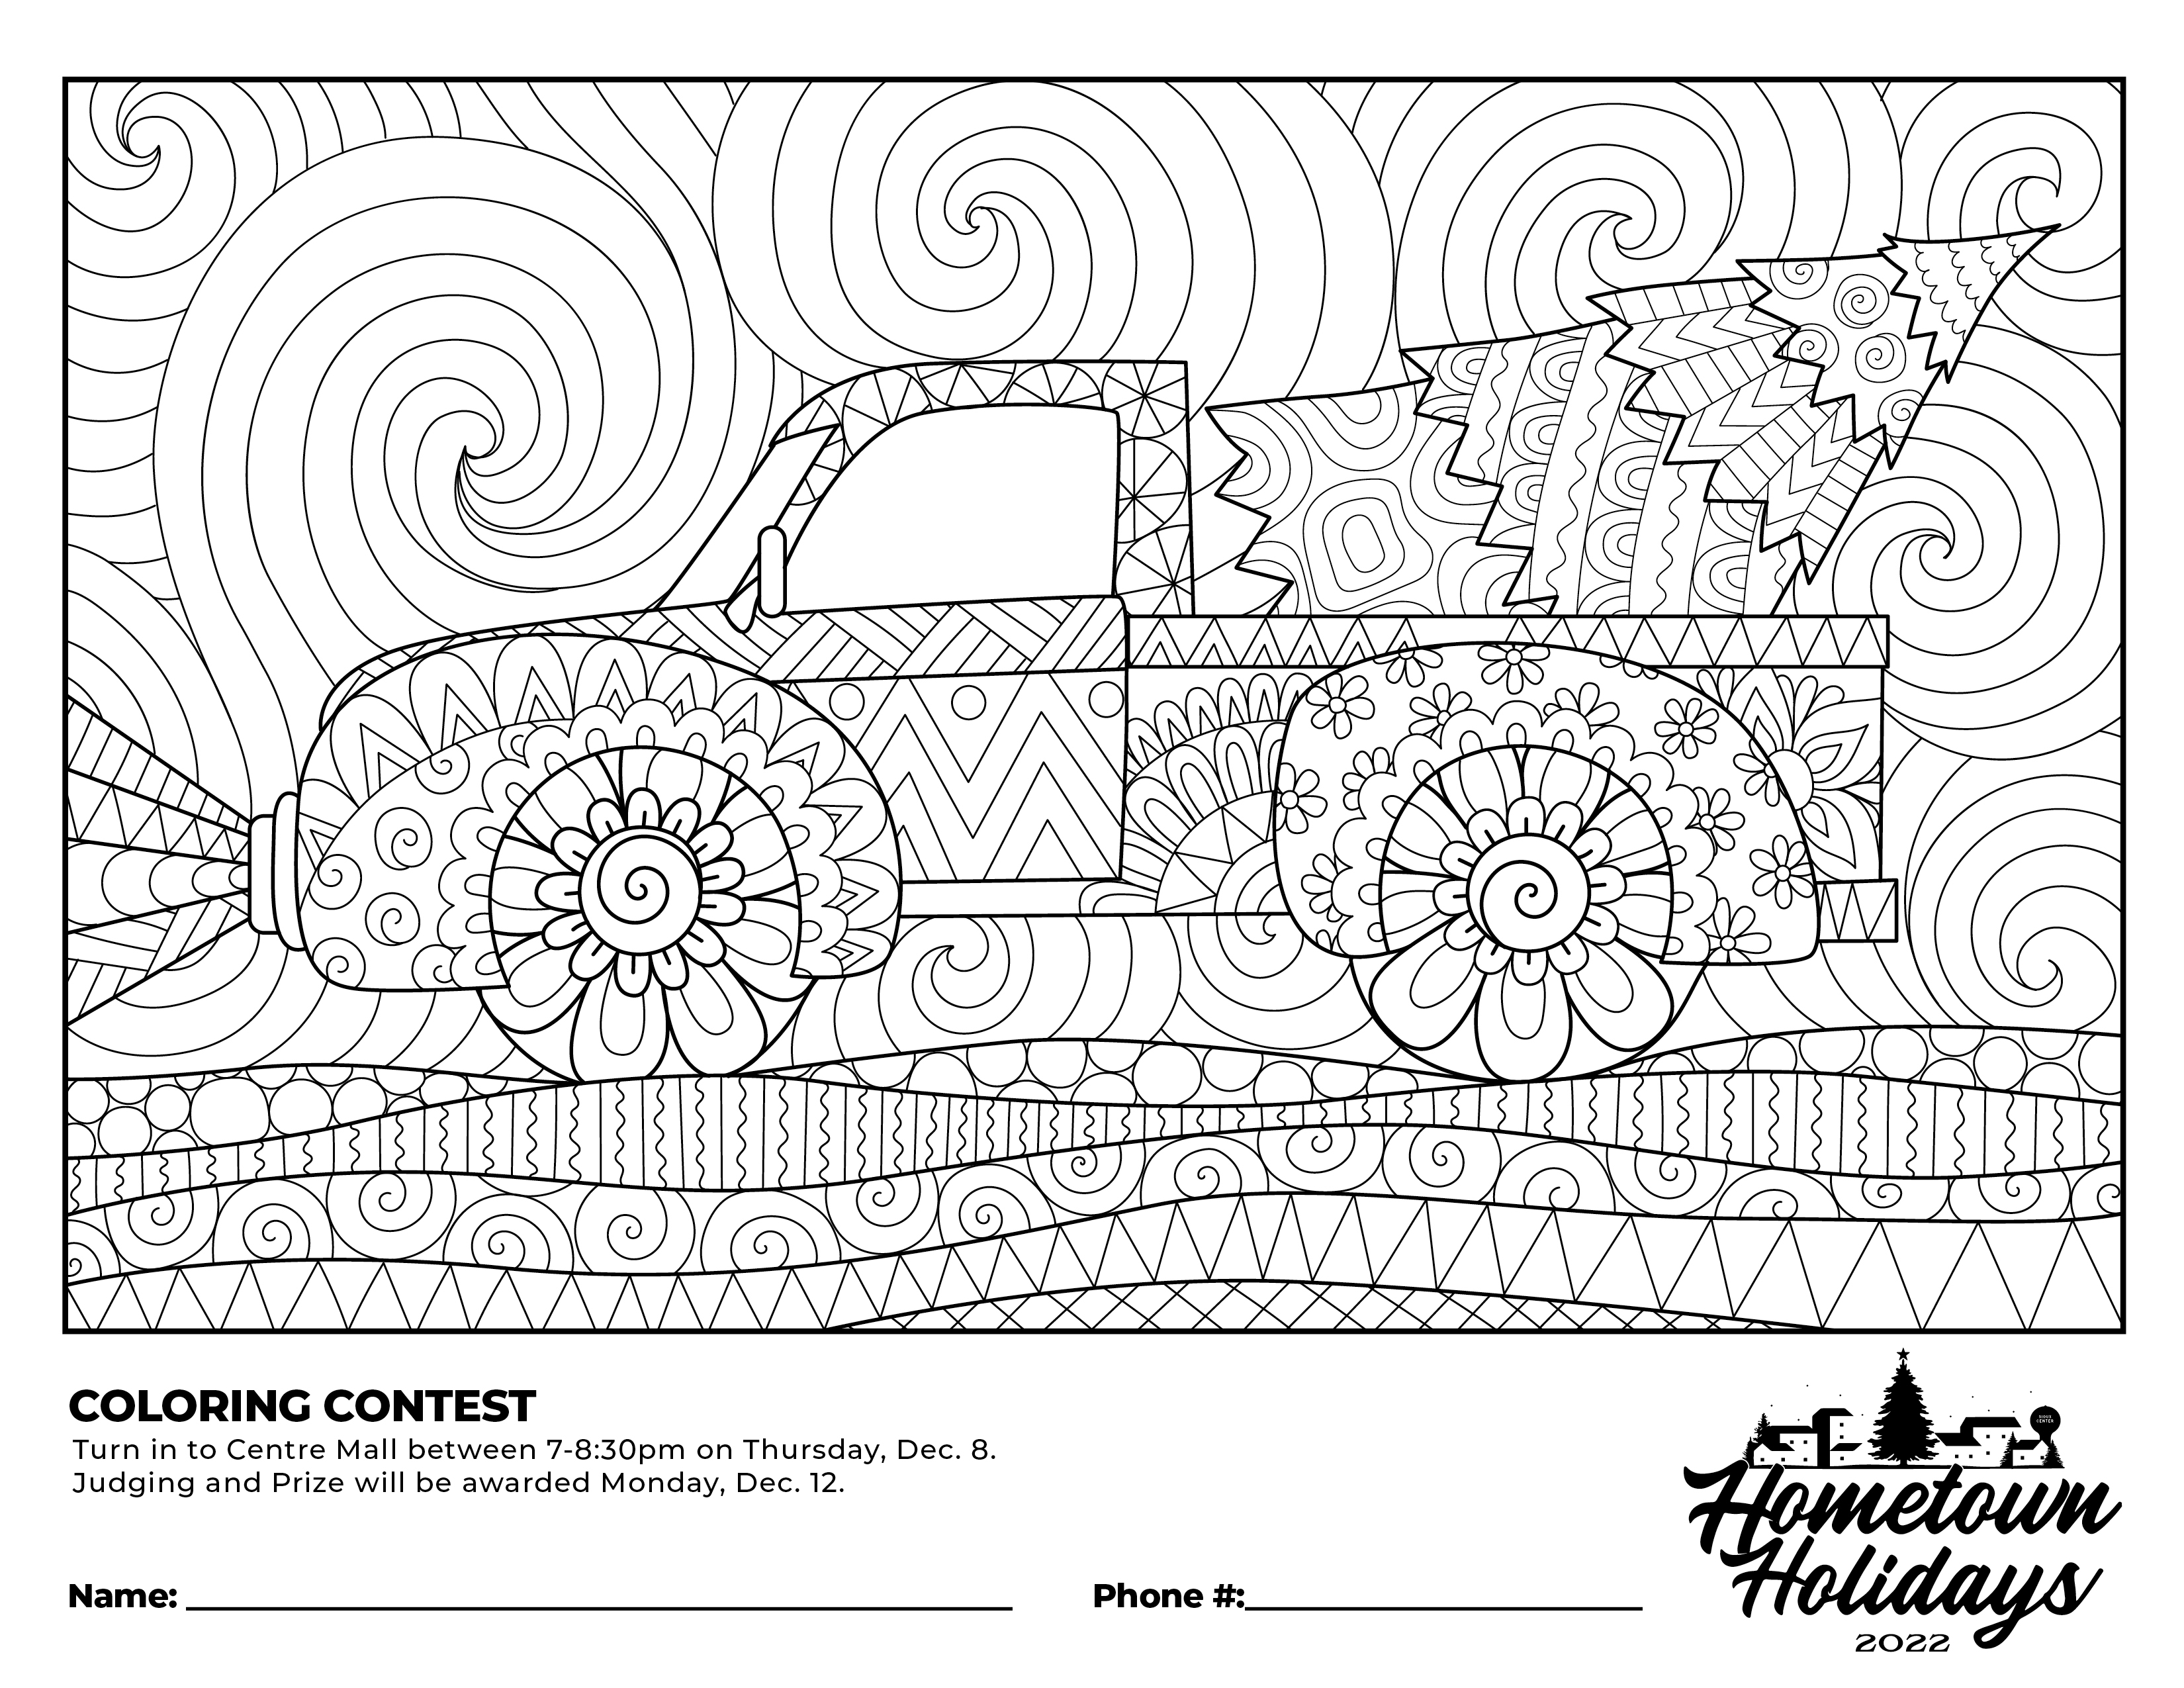 ColoringContest_Adults2